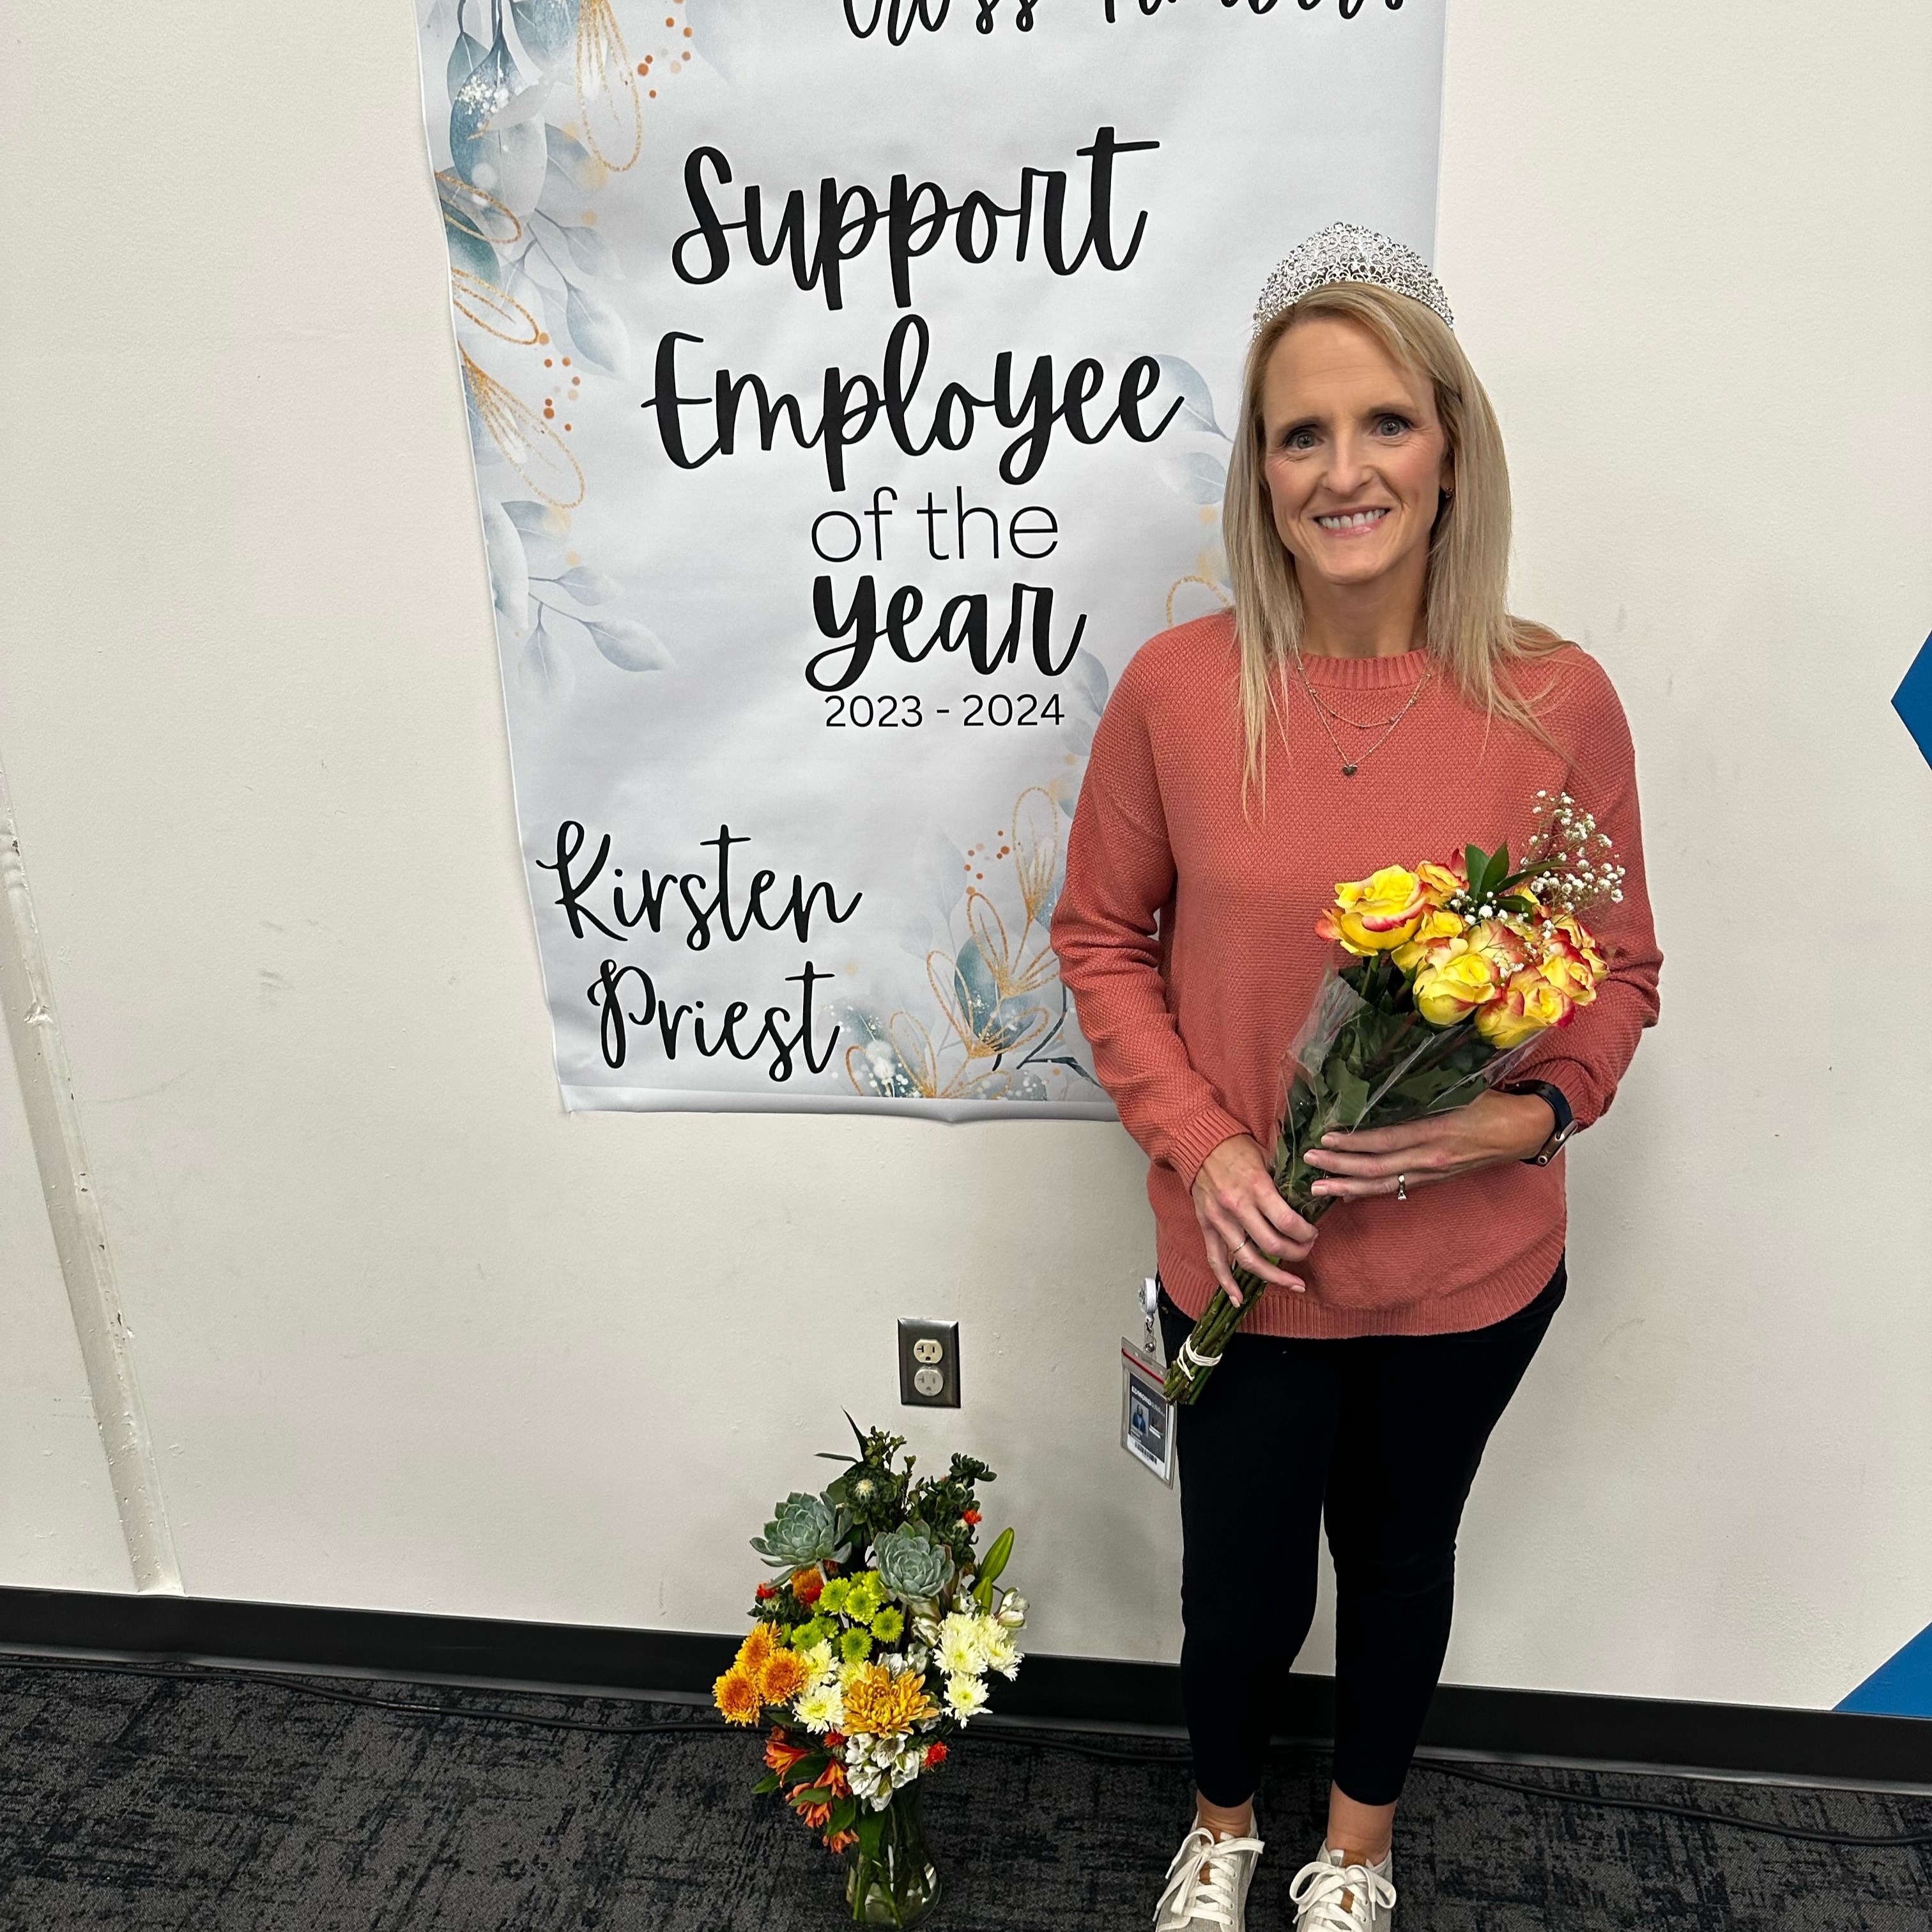 Cross Timbers support employee of the year